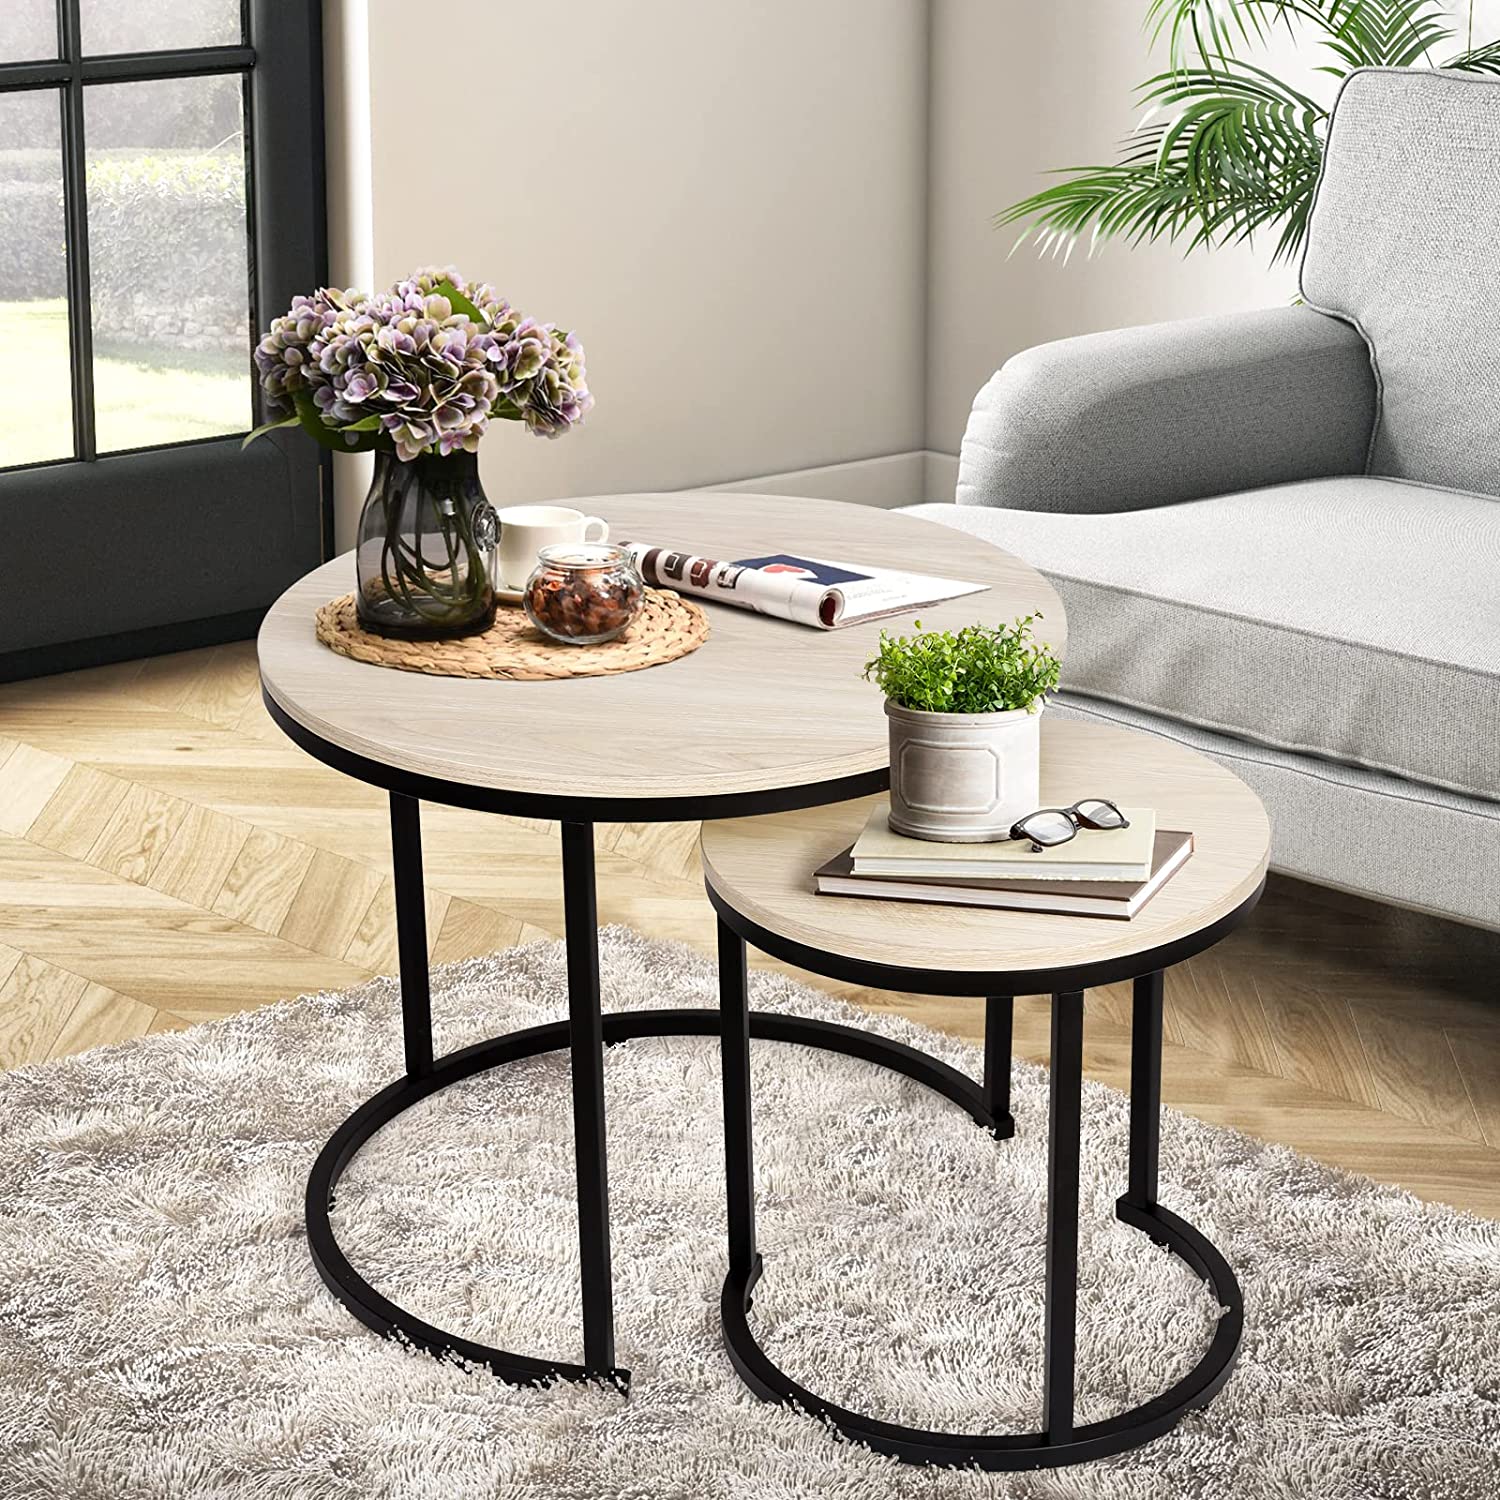 Two round nesting tables with black metal frames and light wood tabletops, one larger than the other, arranged in a living room setting.